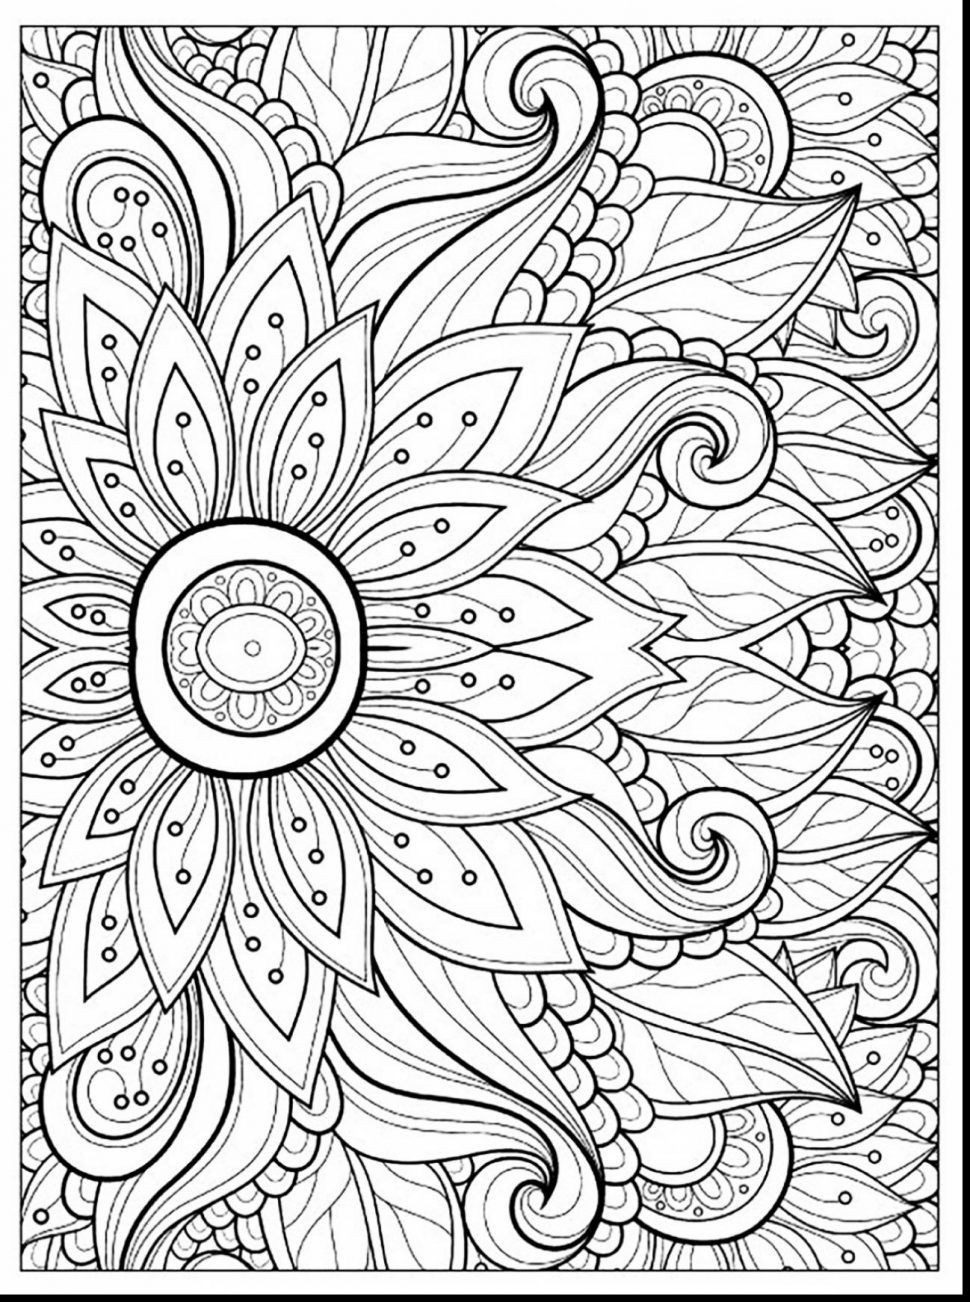 coloring-pages-for-winter-6th-graders